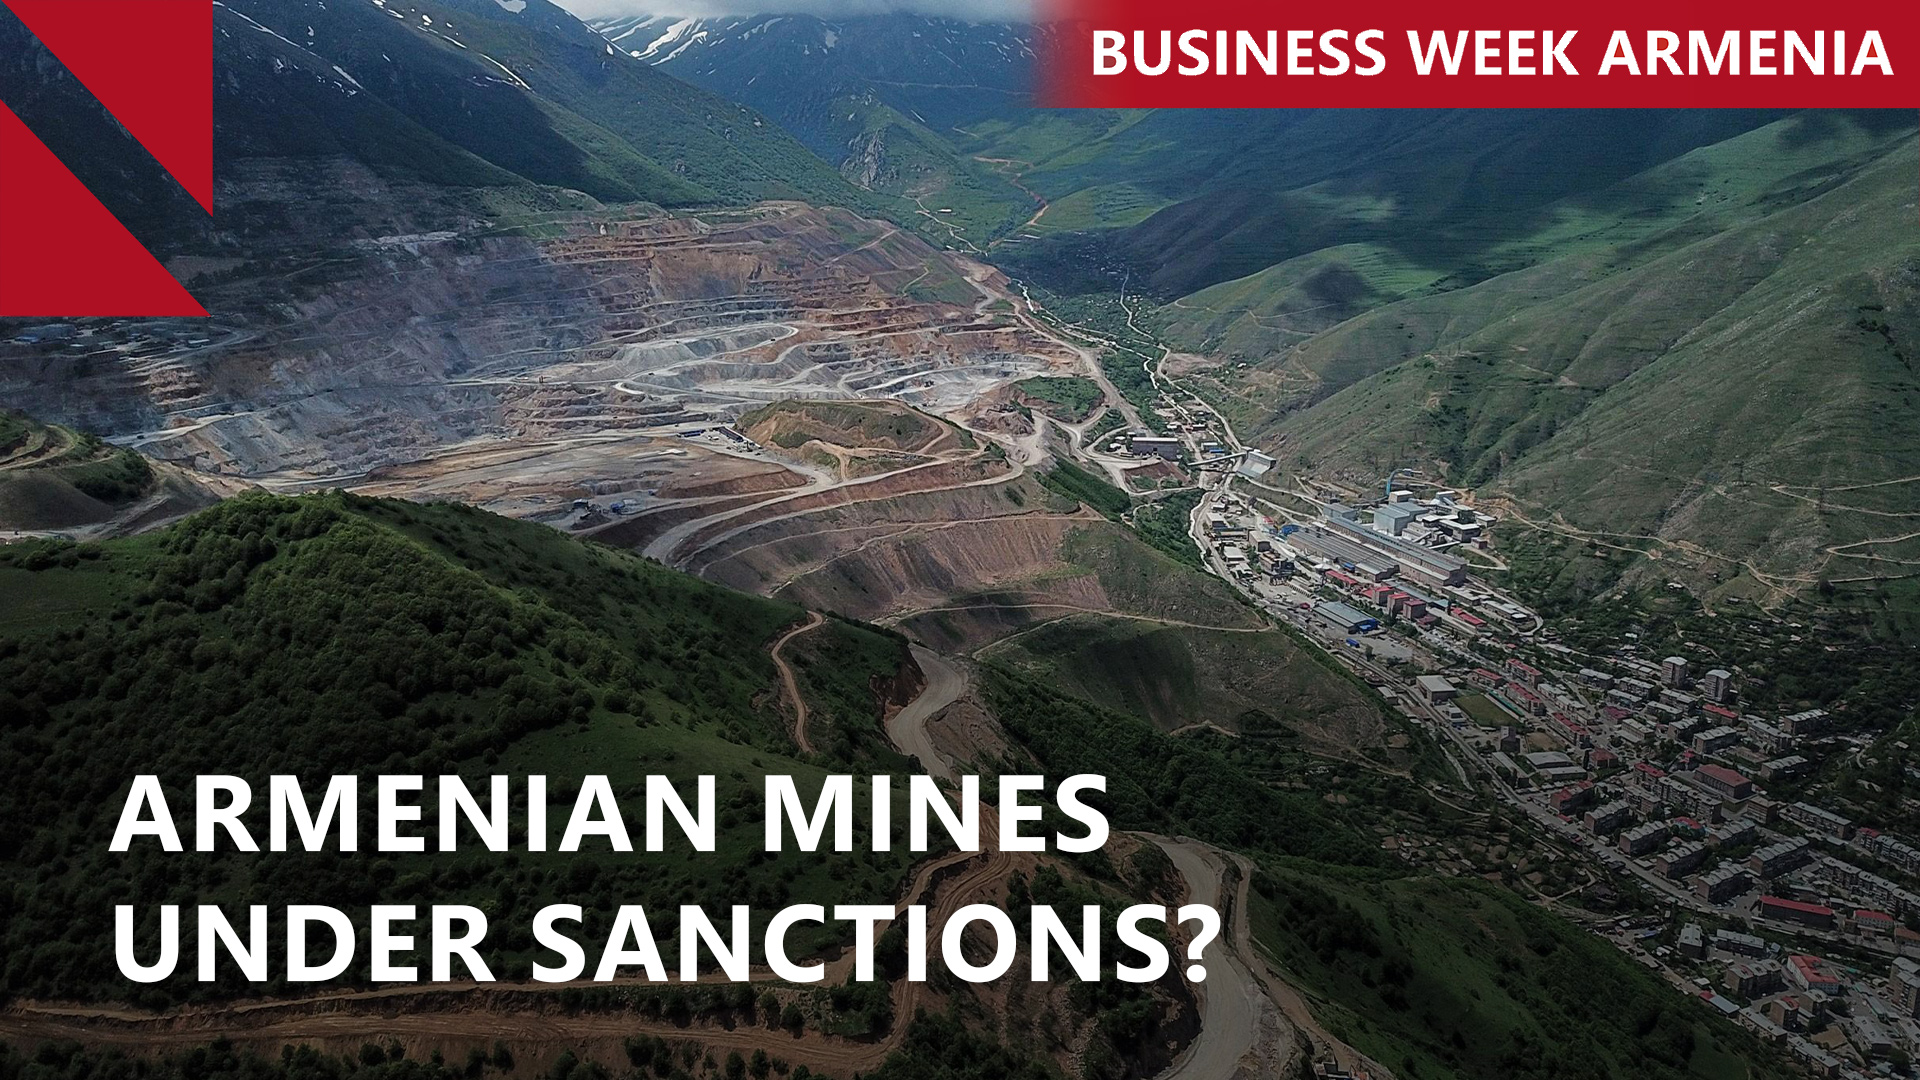 US sanctions Russian operator of Armenia’s biggest mine: THIS WEEK IN BUSINESS